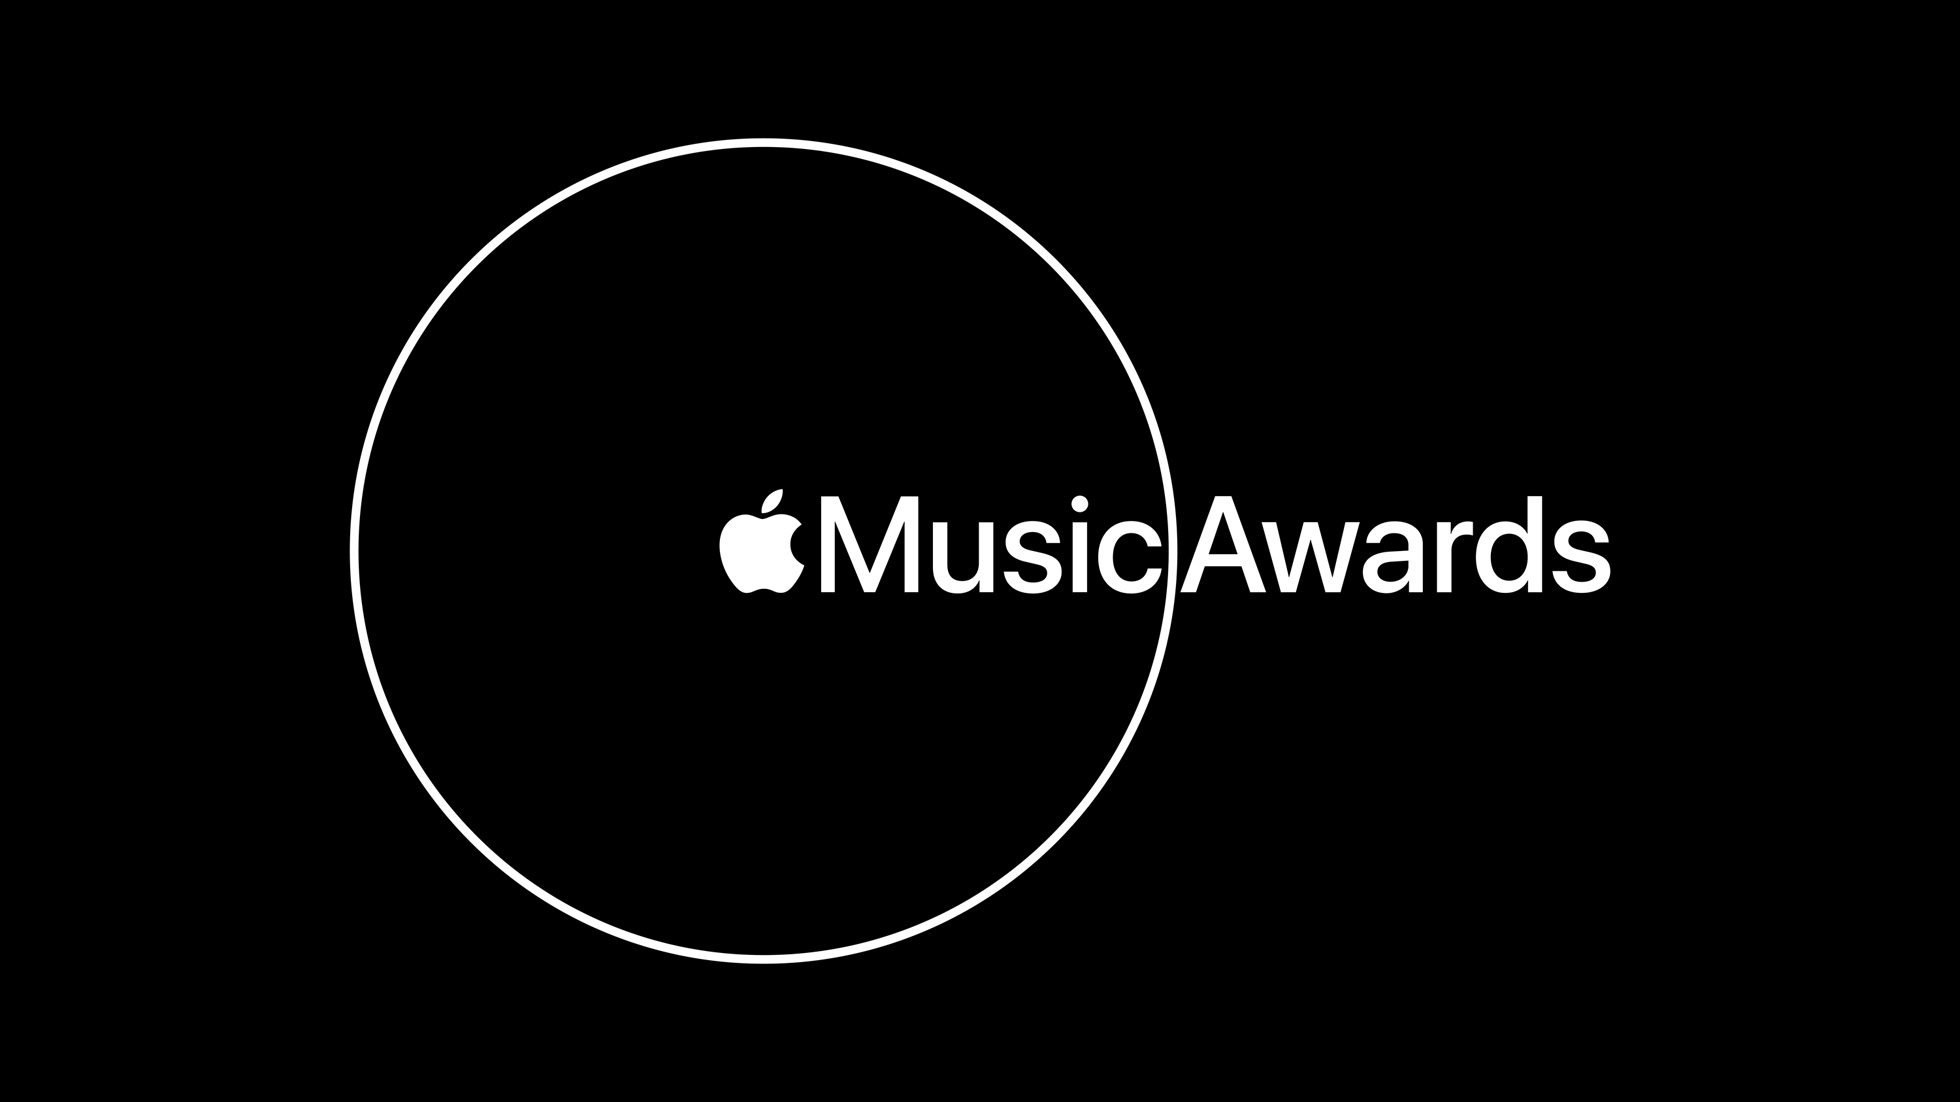 An imag showing a white circle outline wit the words "Apple Music Awards" inside and outside of the circle